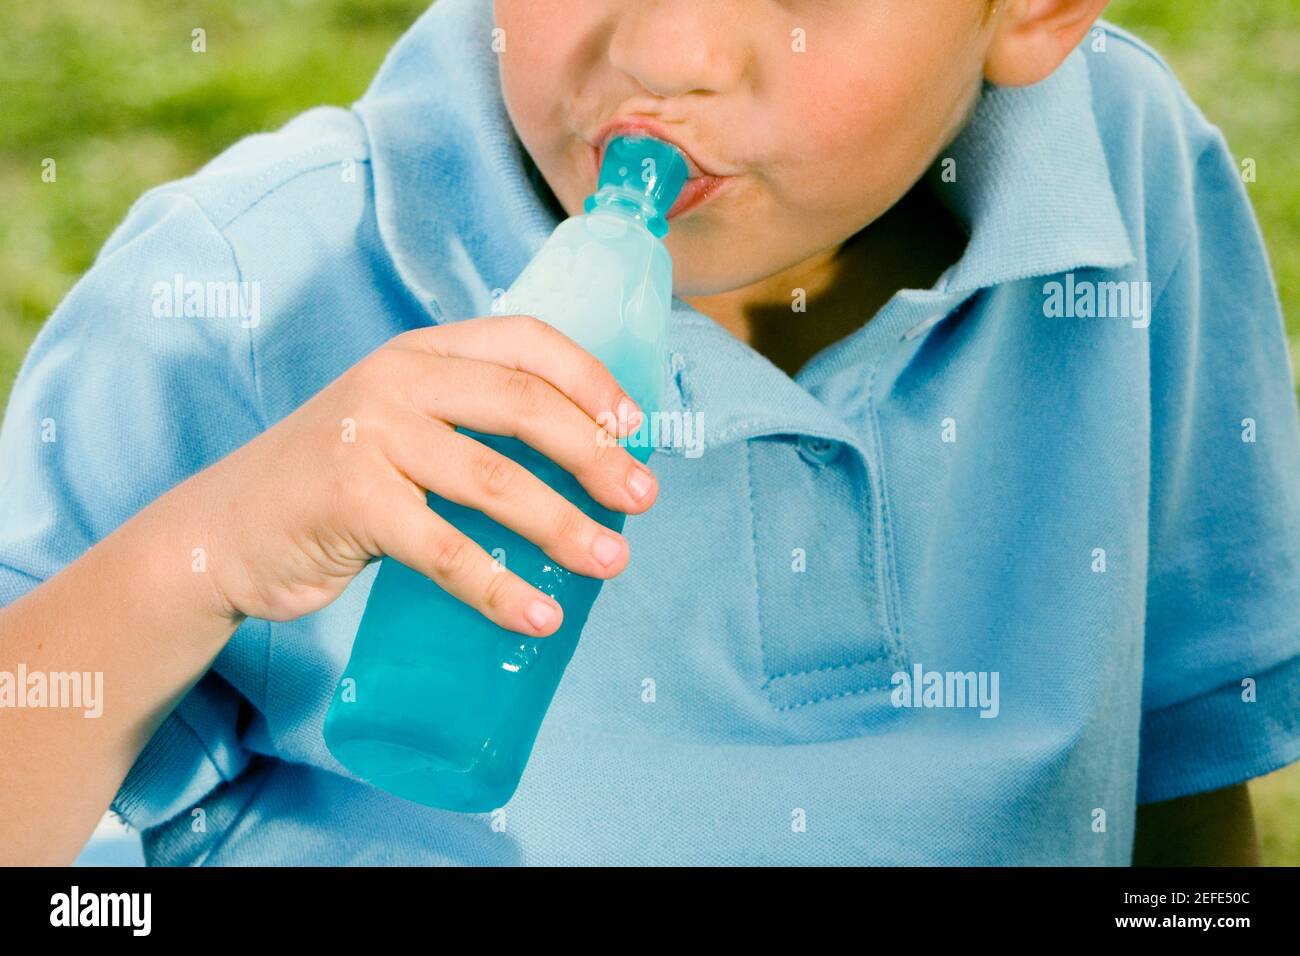 https://c8.alamy.com/comp/2EFE50C/close-up-of-a-boy-drinking-water-from-a-bottle-2EFE50C.jpg